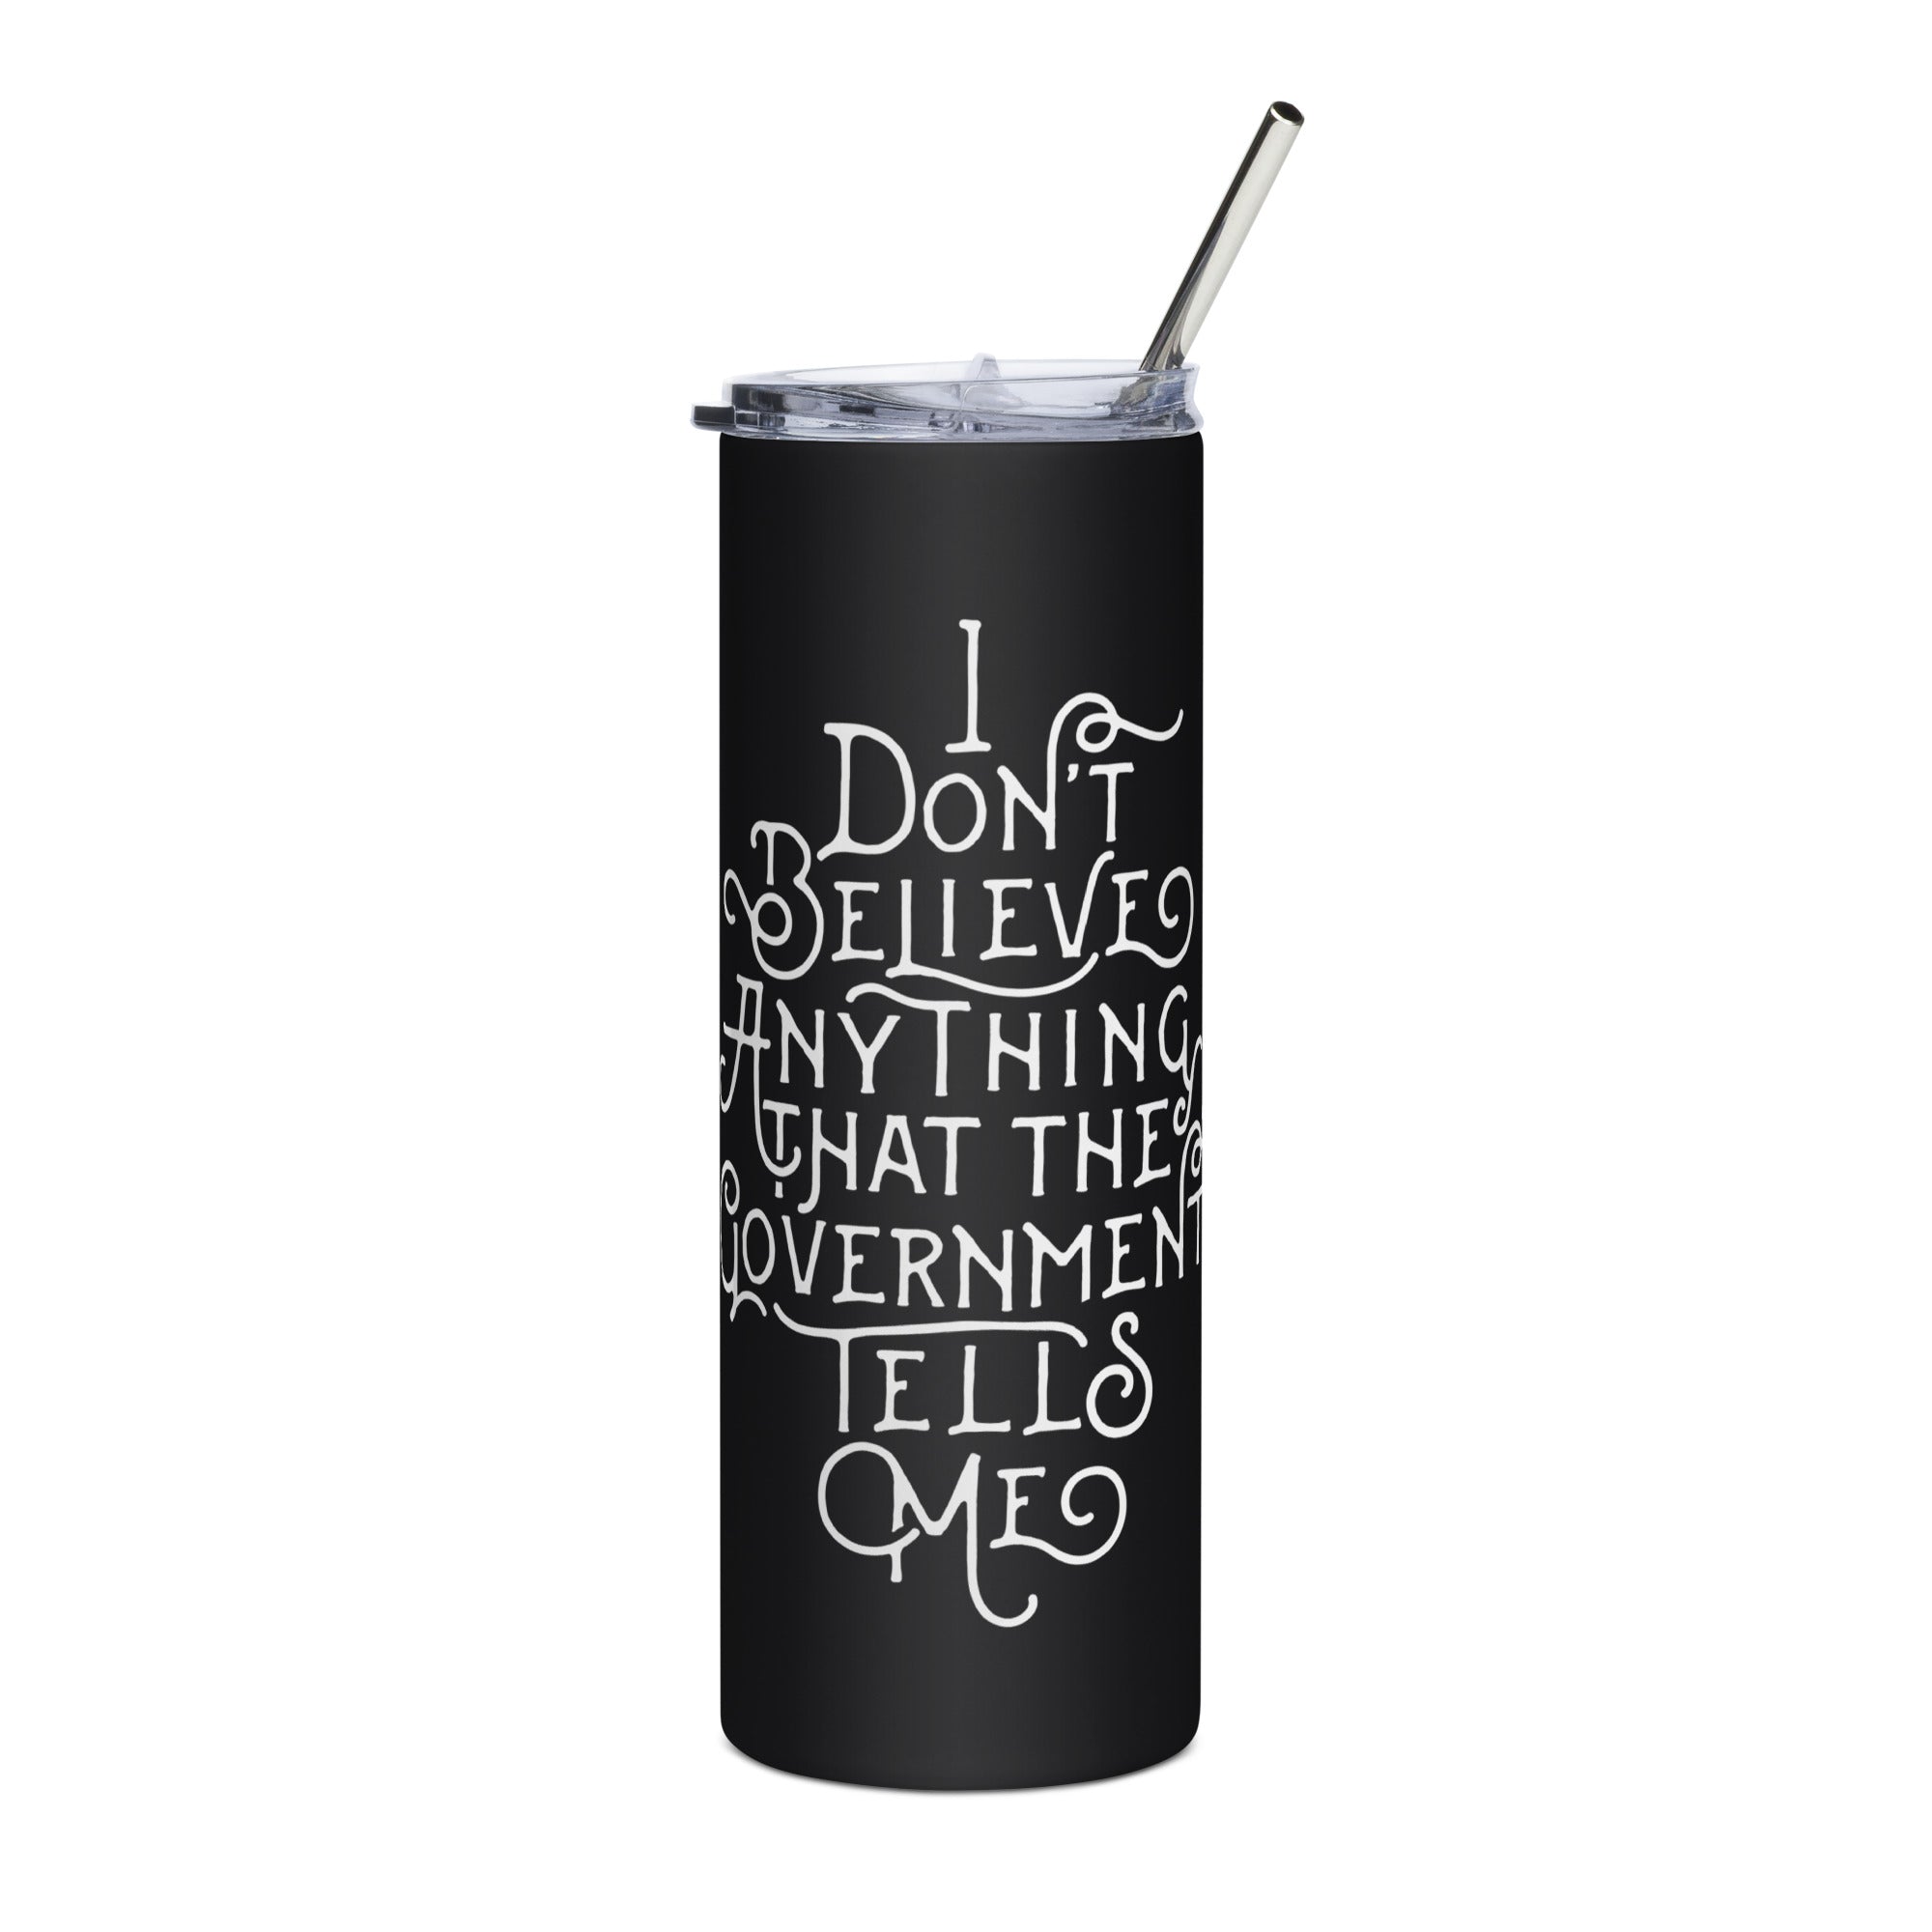 I Don't Believe Anything The Government Tells Me Stainless steel tumbler